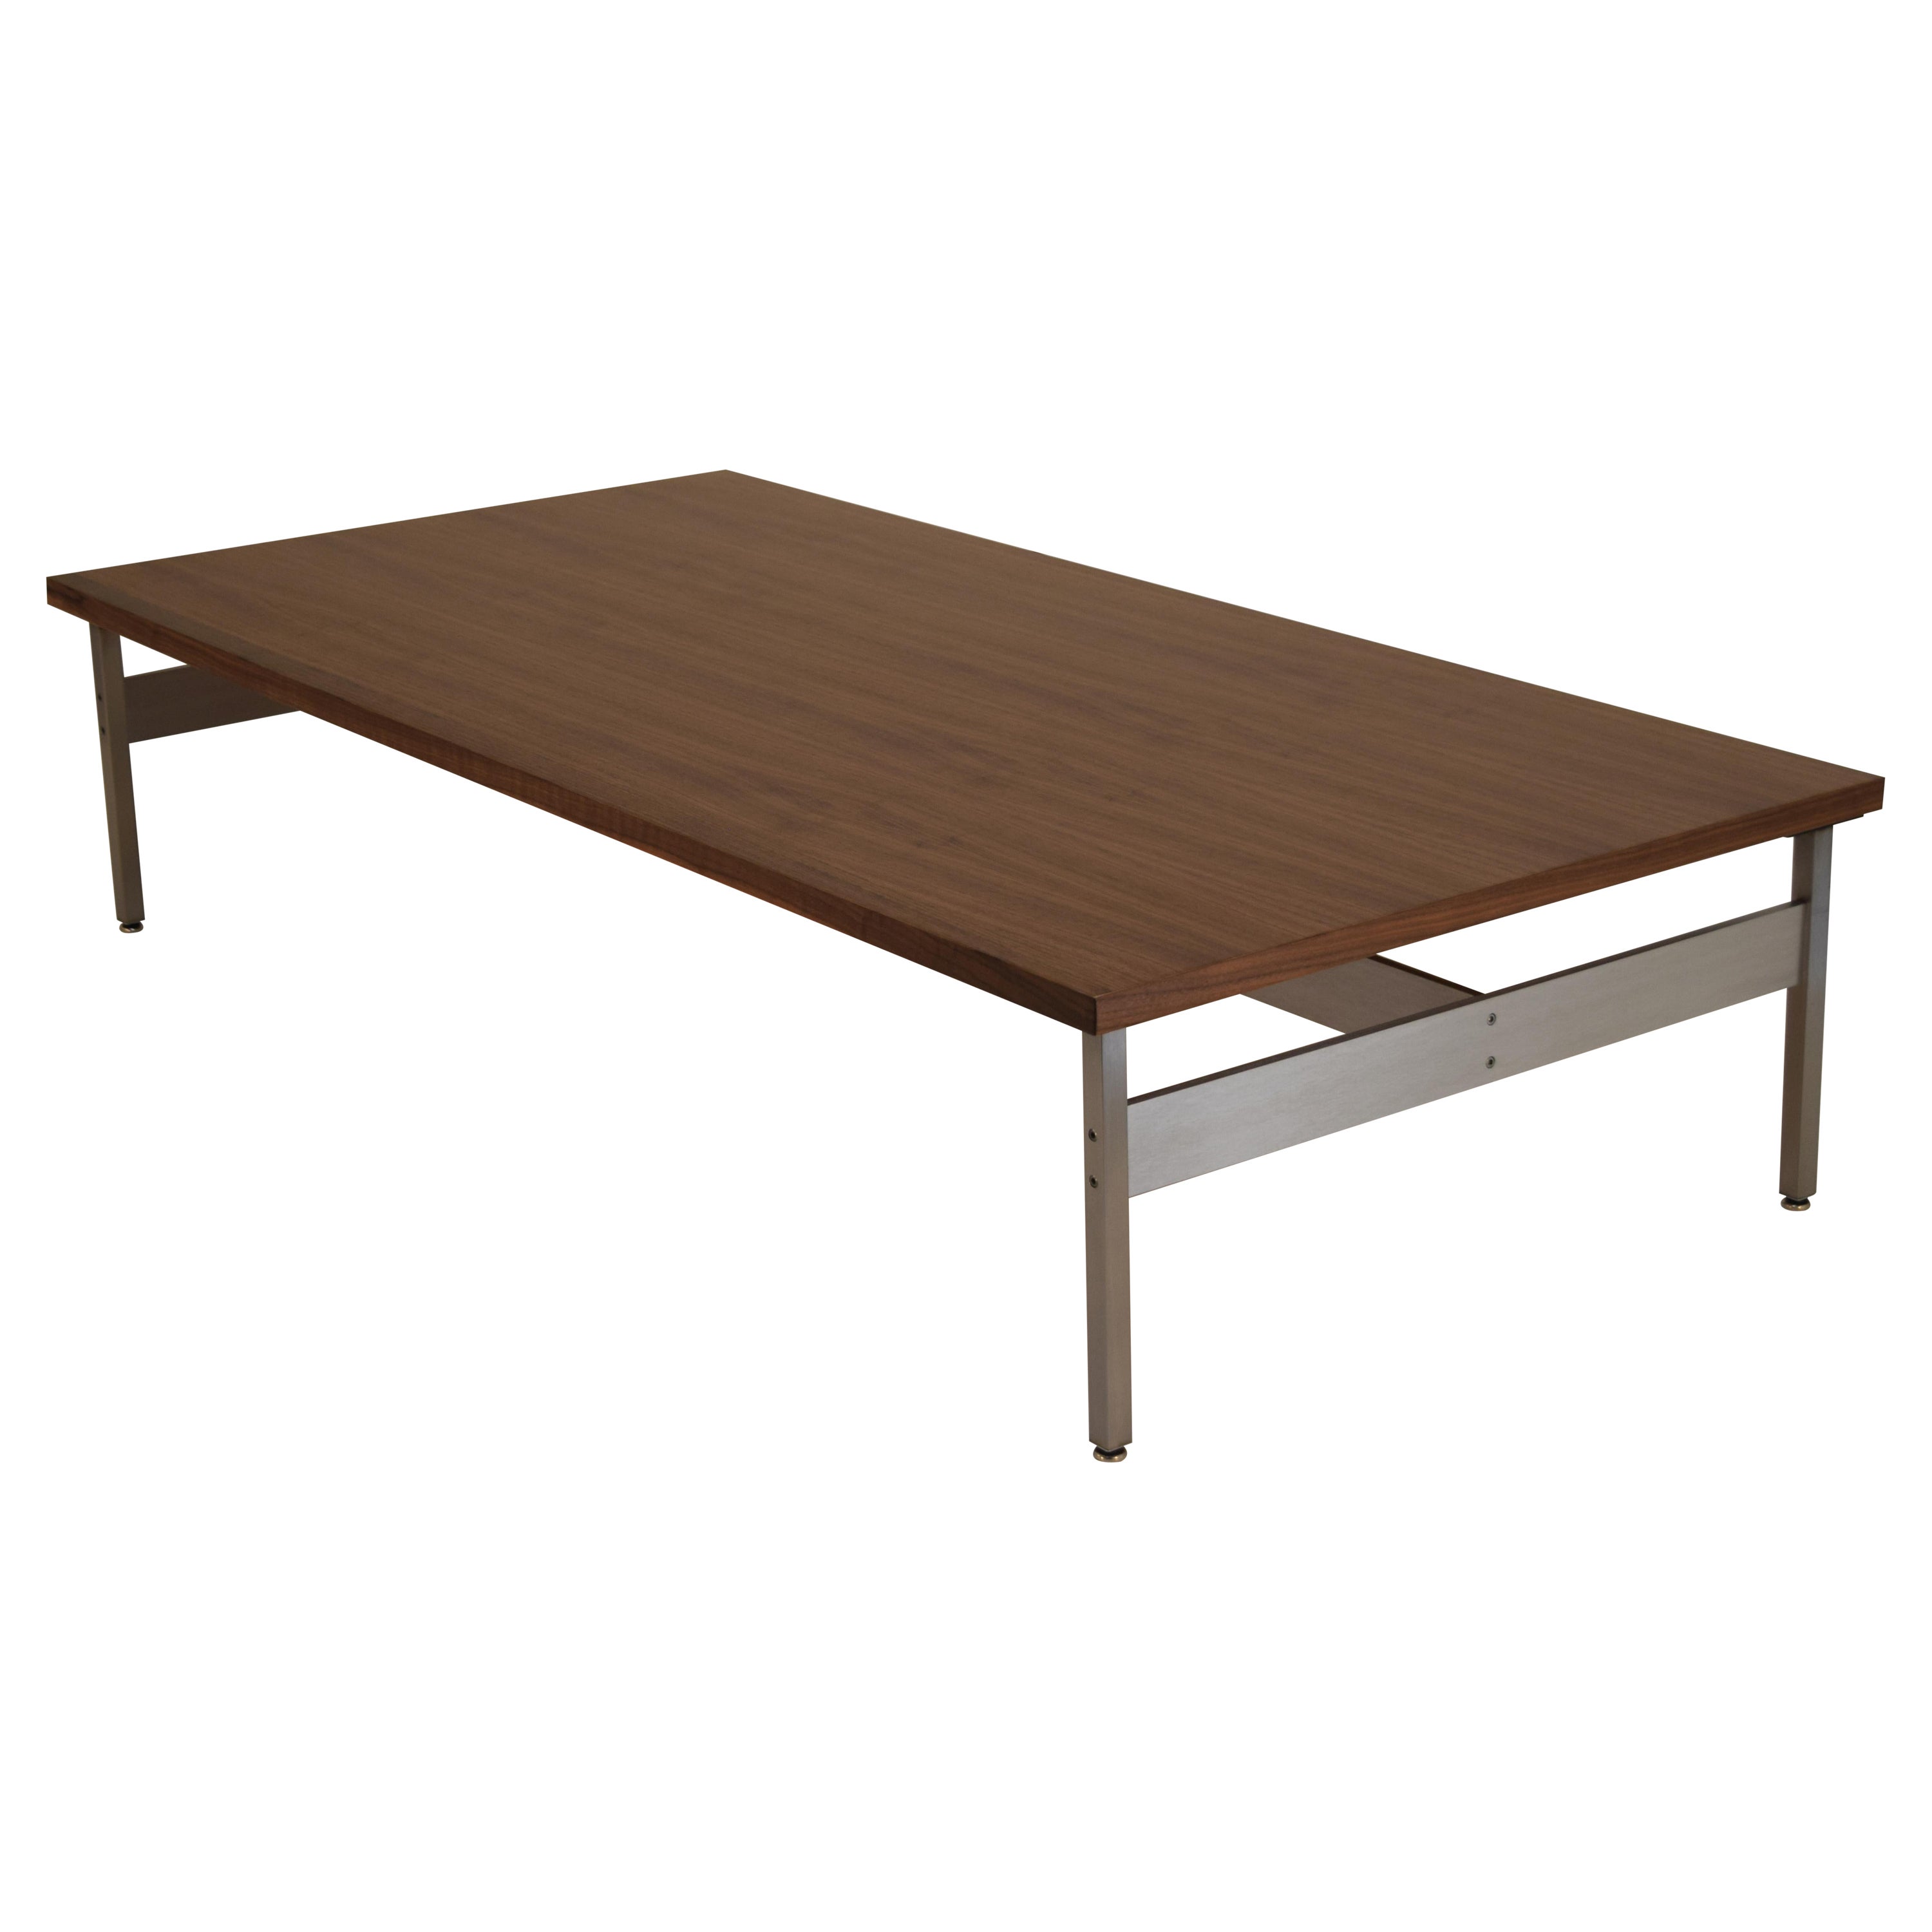 Giant Walnut Coffee Table with Brushed Aluminum and Steel by Lehigh Leopold